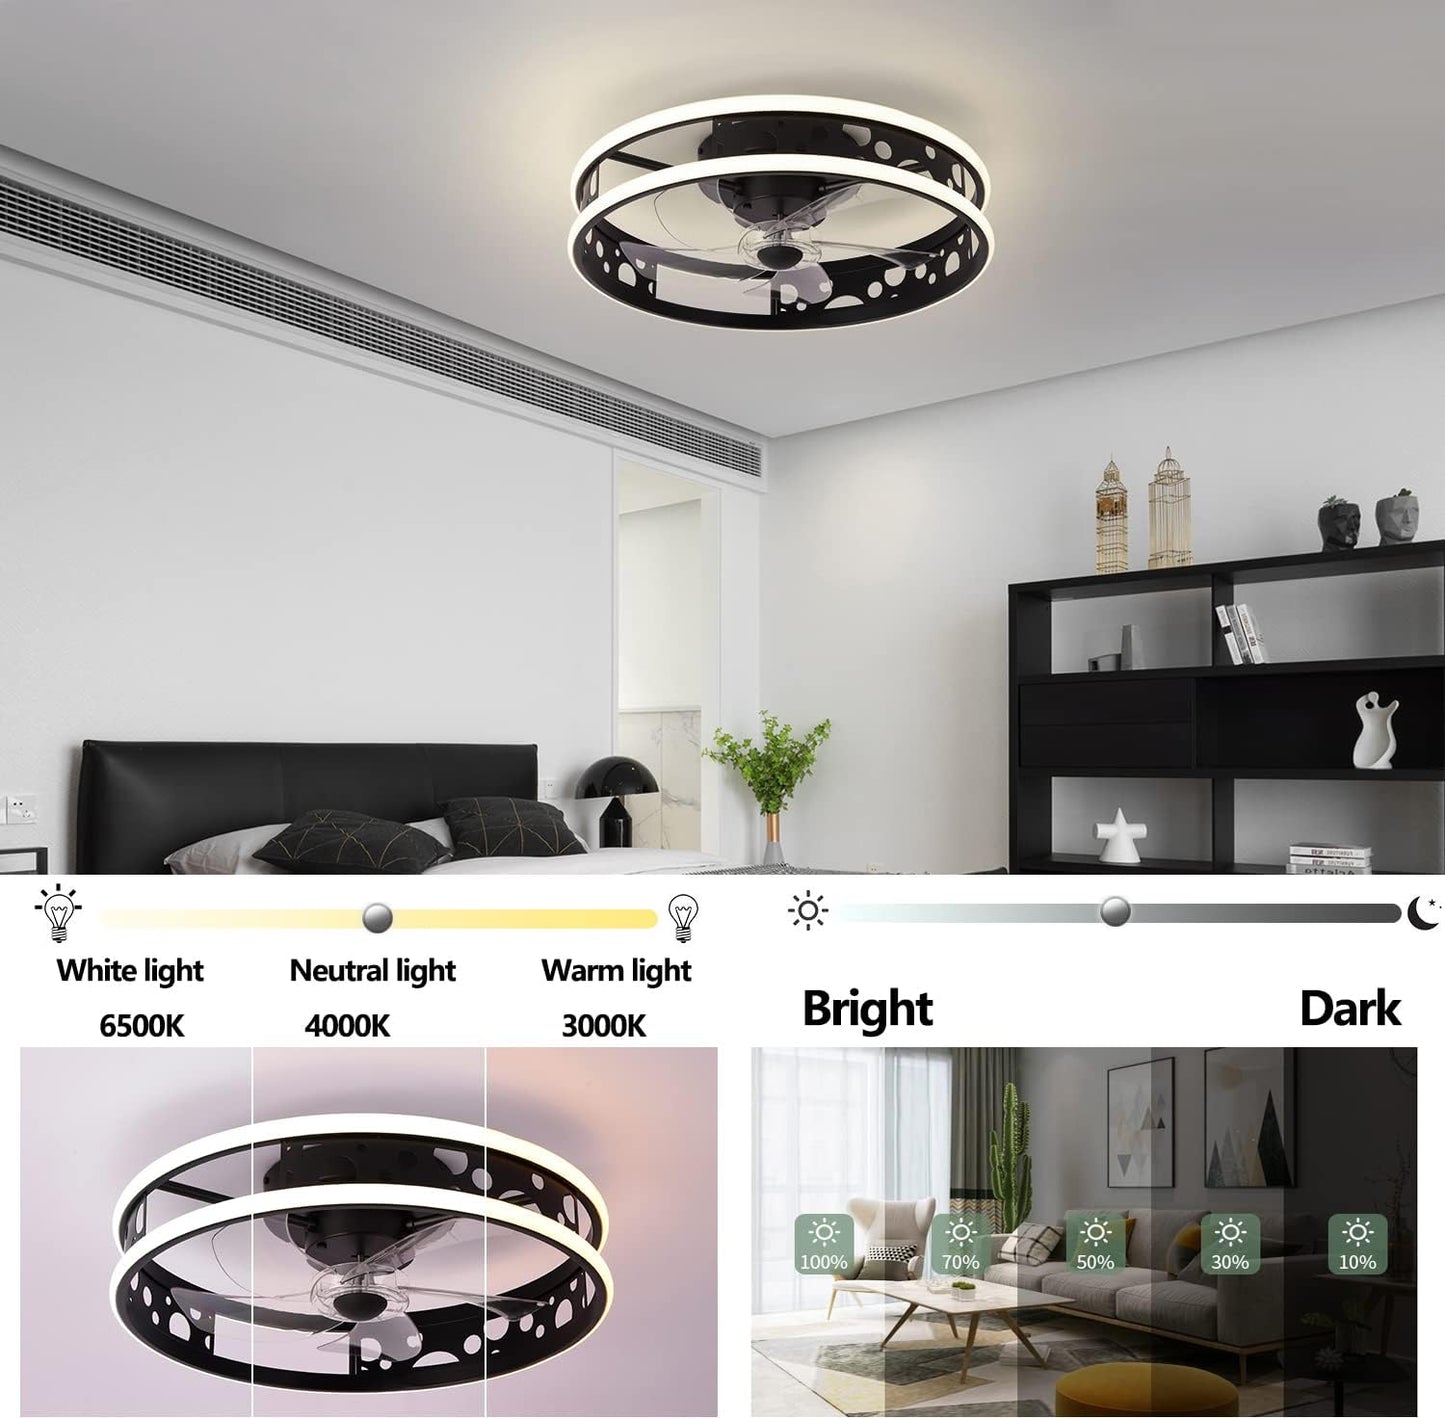 Awsinil Ceiling Fan with Lights, Low Profile 20in Reversible Ceiling Fans with Light and Remote, Modern 6 Speeds Fans Flush Mount for Bedroom Living Dining Room (Black)